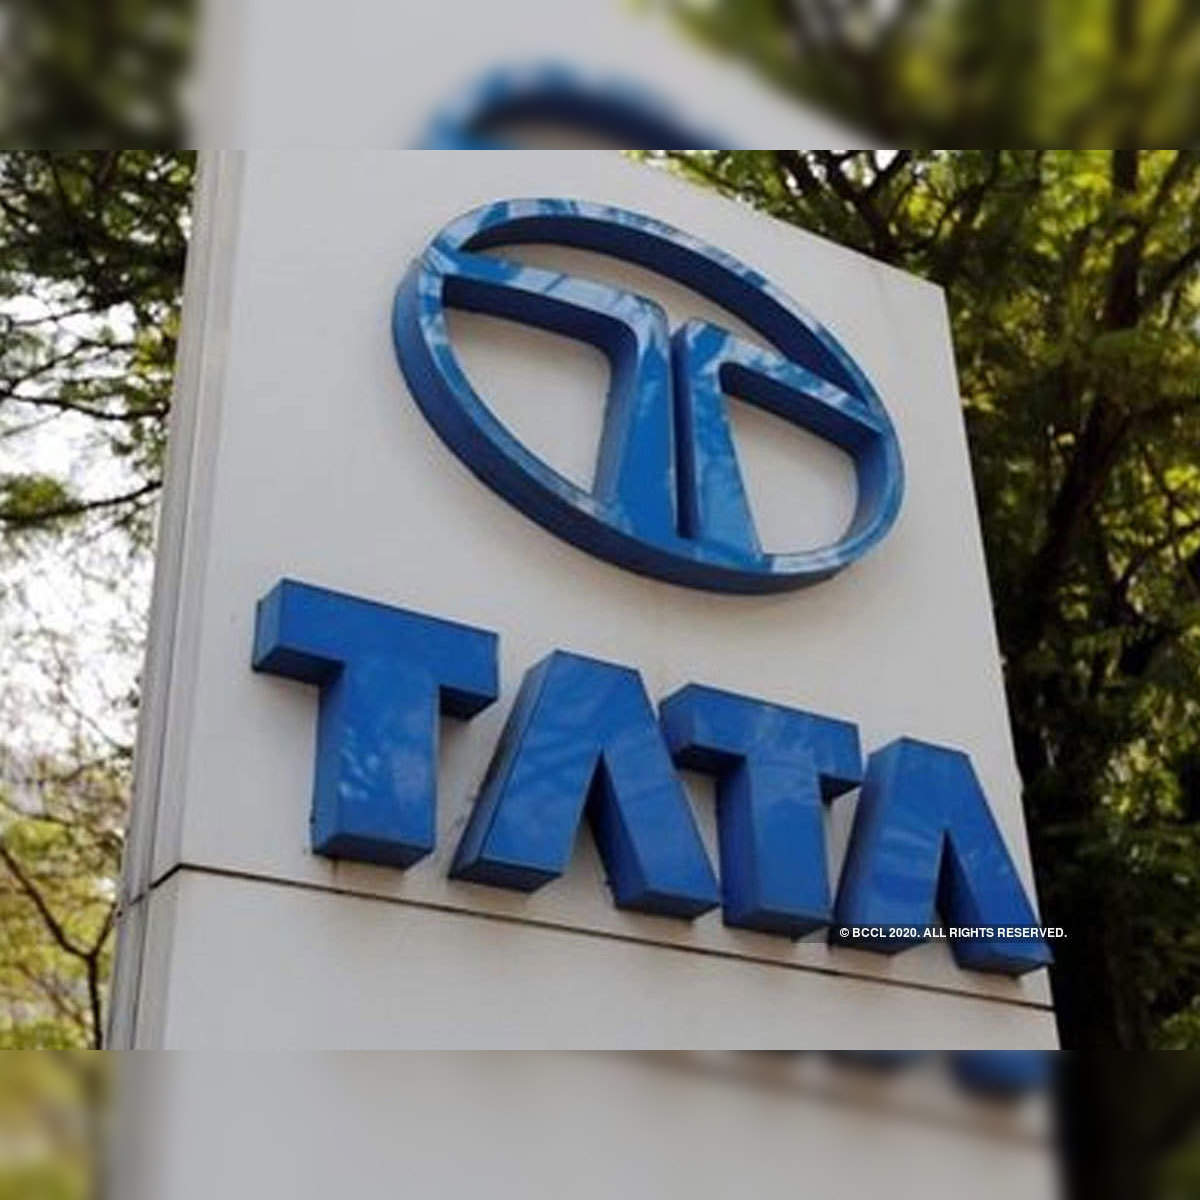 Operations adversely impacted due to COVID-led disruptions: Tata Group  retail firm Trent - The Economic Times